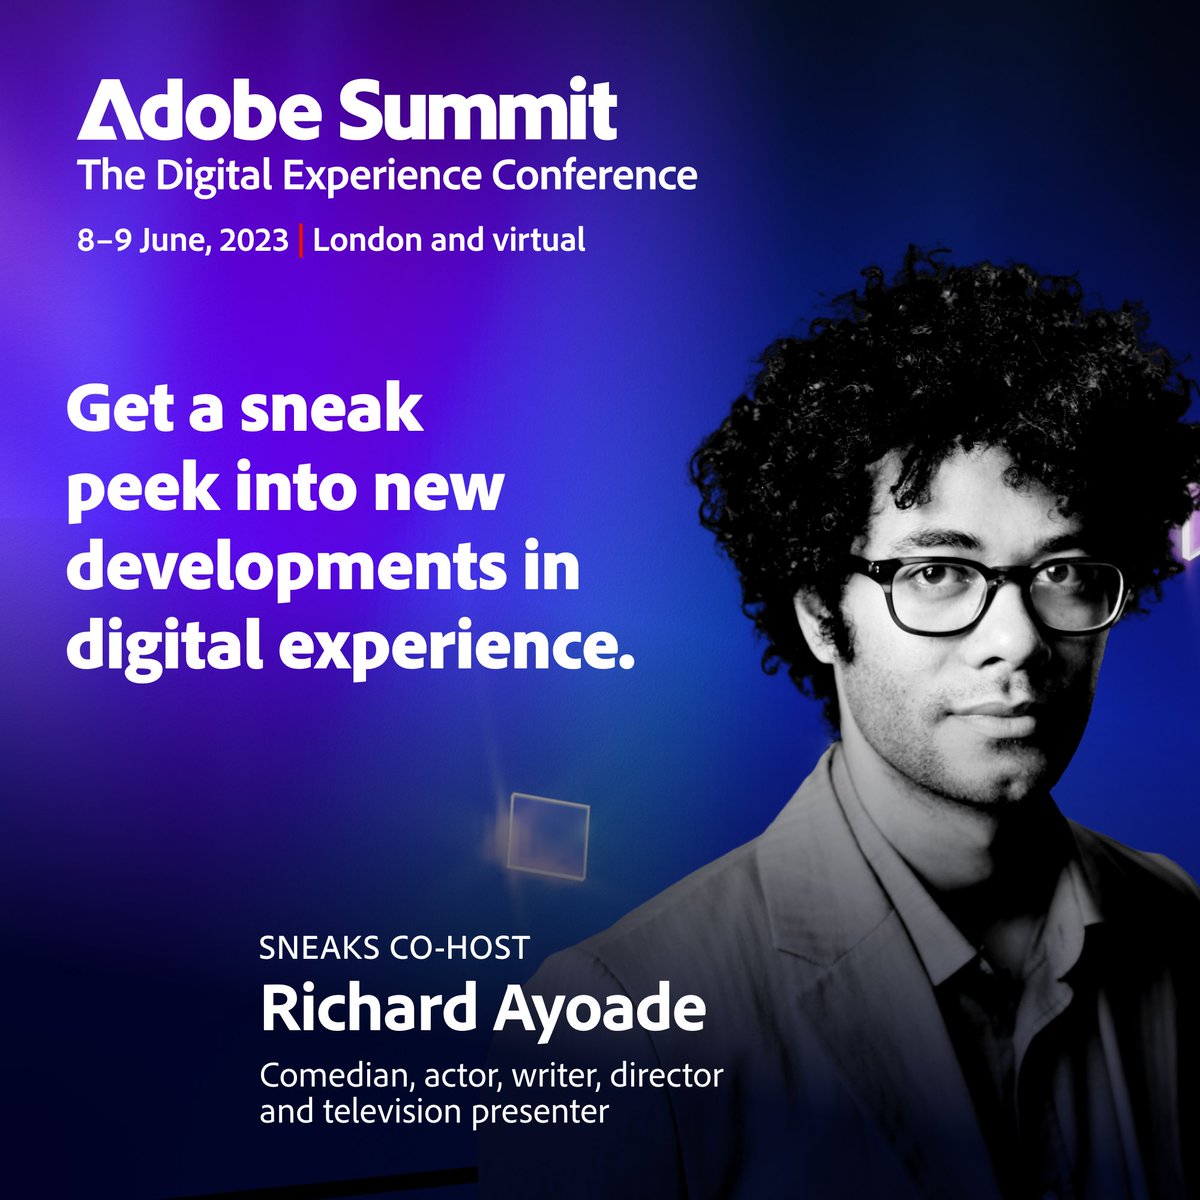 Don't miss multi-award-winning comedian, actor and writer Richard Ayoade who will co-host this year's Sneaks at #AdobeSummitEMEA this Thursday✨. Add the session to your schedule here: adobe.ly/3l1SPdH